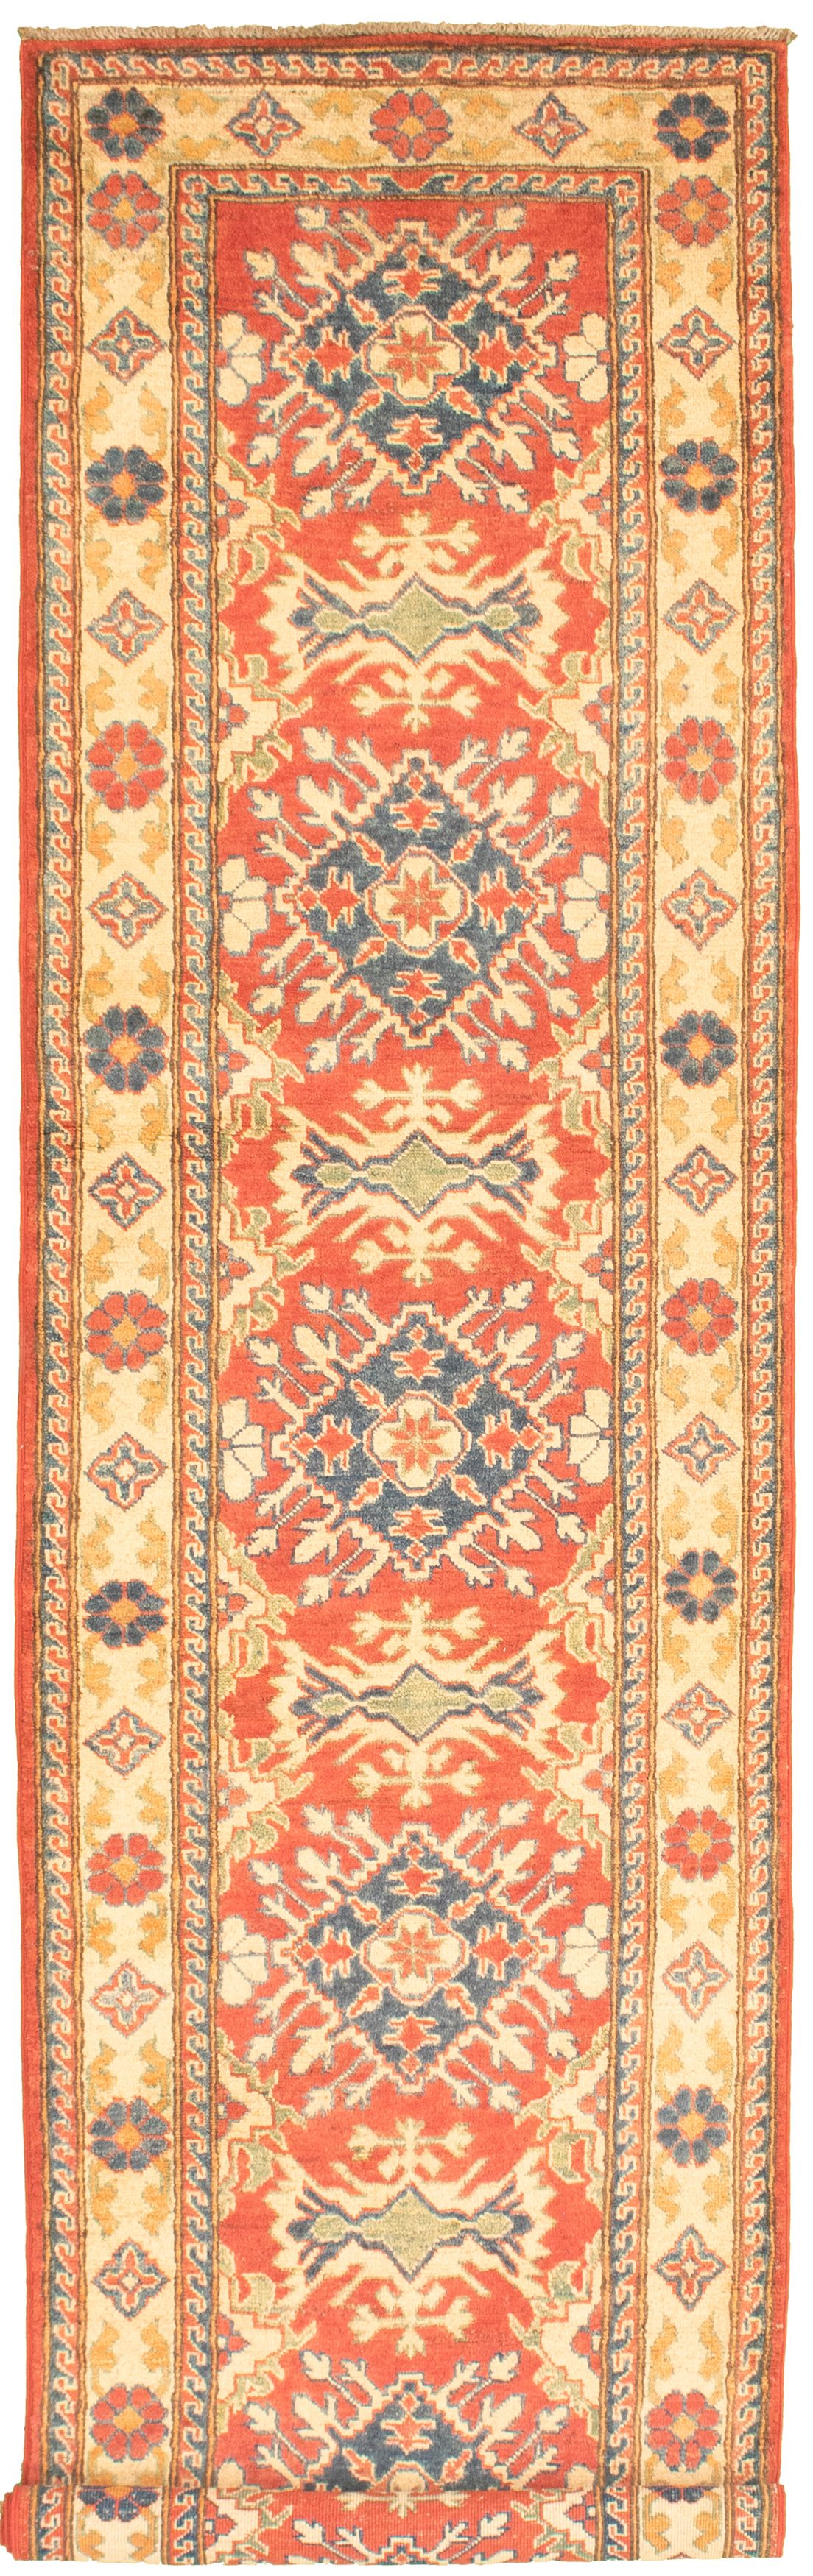 Hand-knotted Finest Gazni Red Wool Rug 2'8" x 10'11" Size: 2'8" x 10'11"  